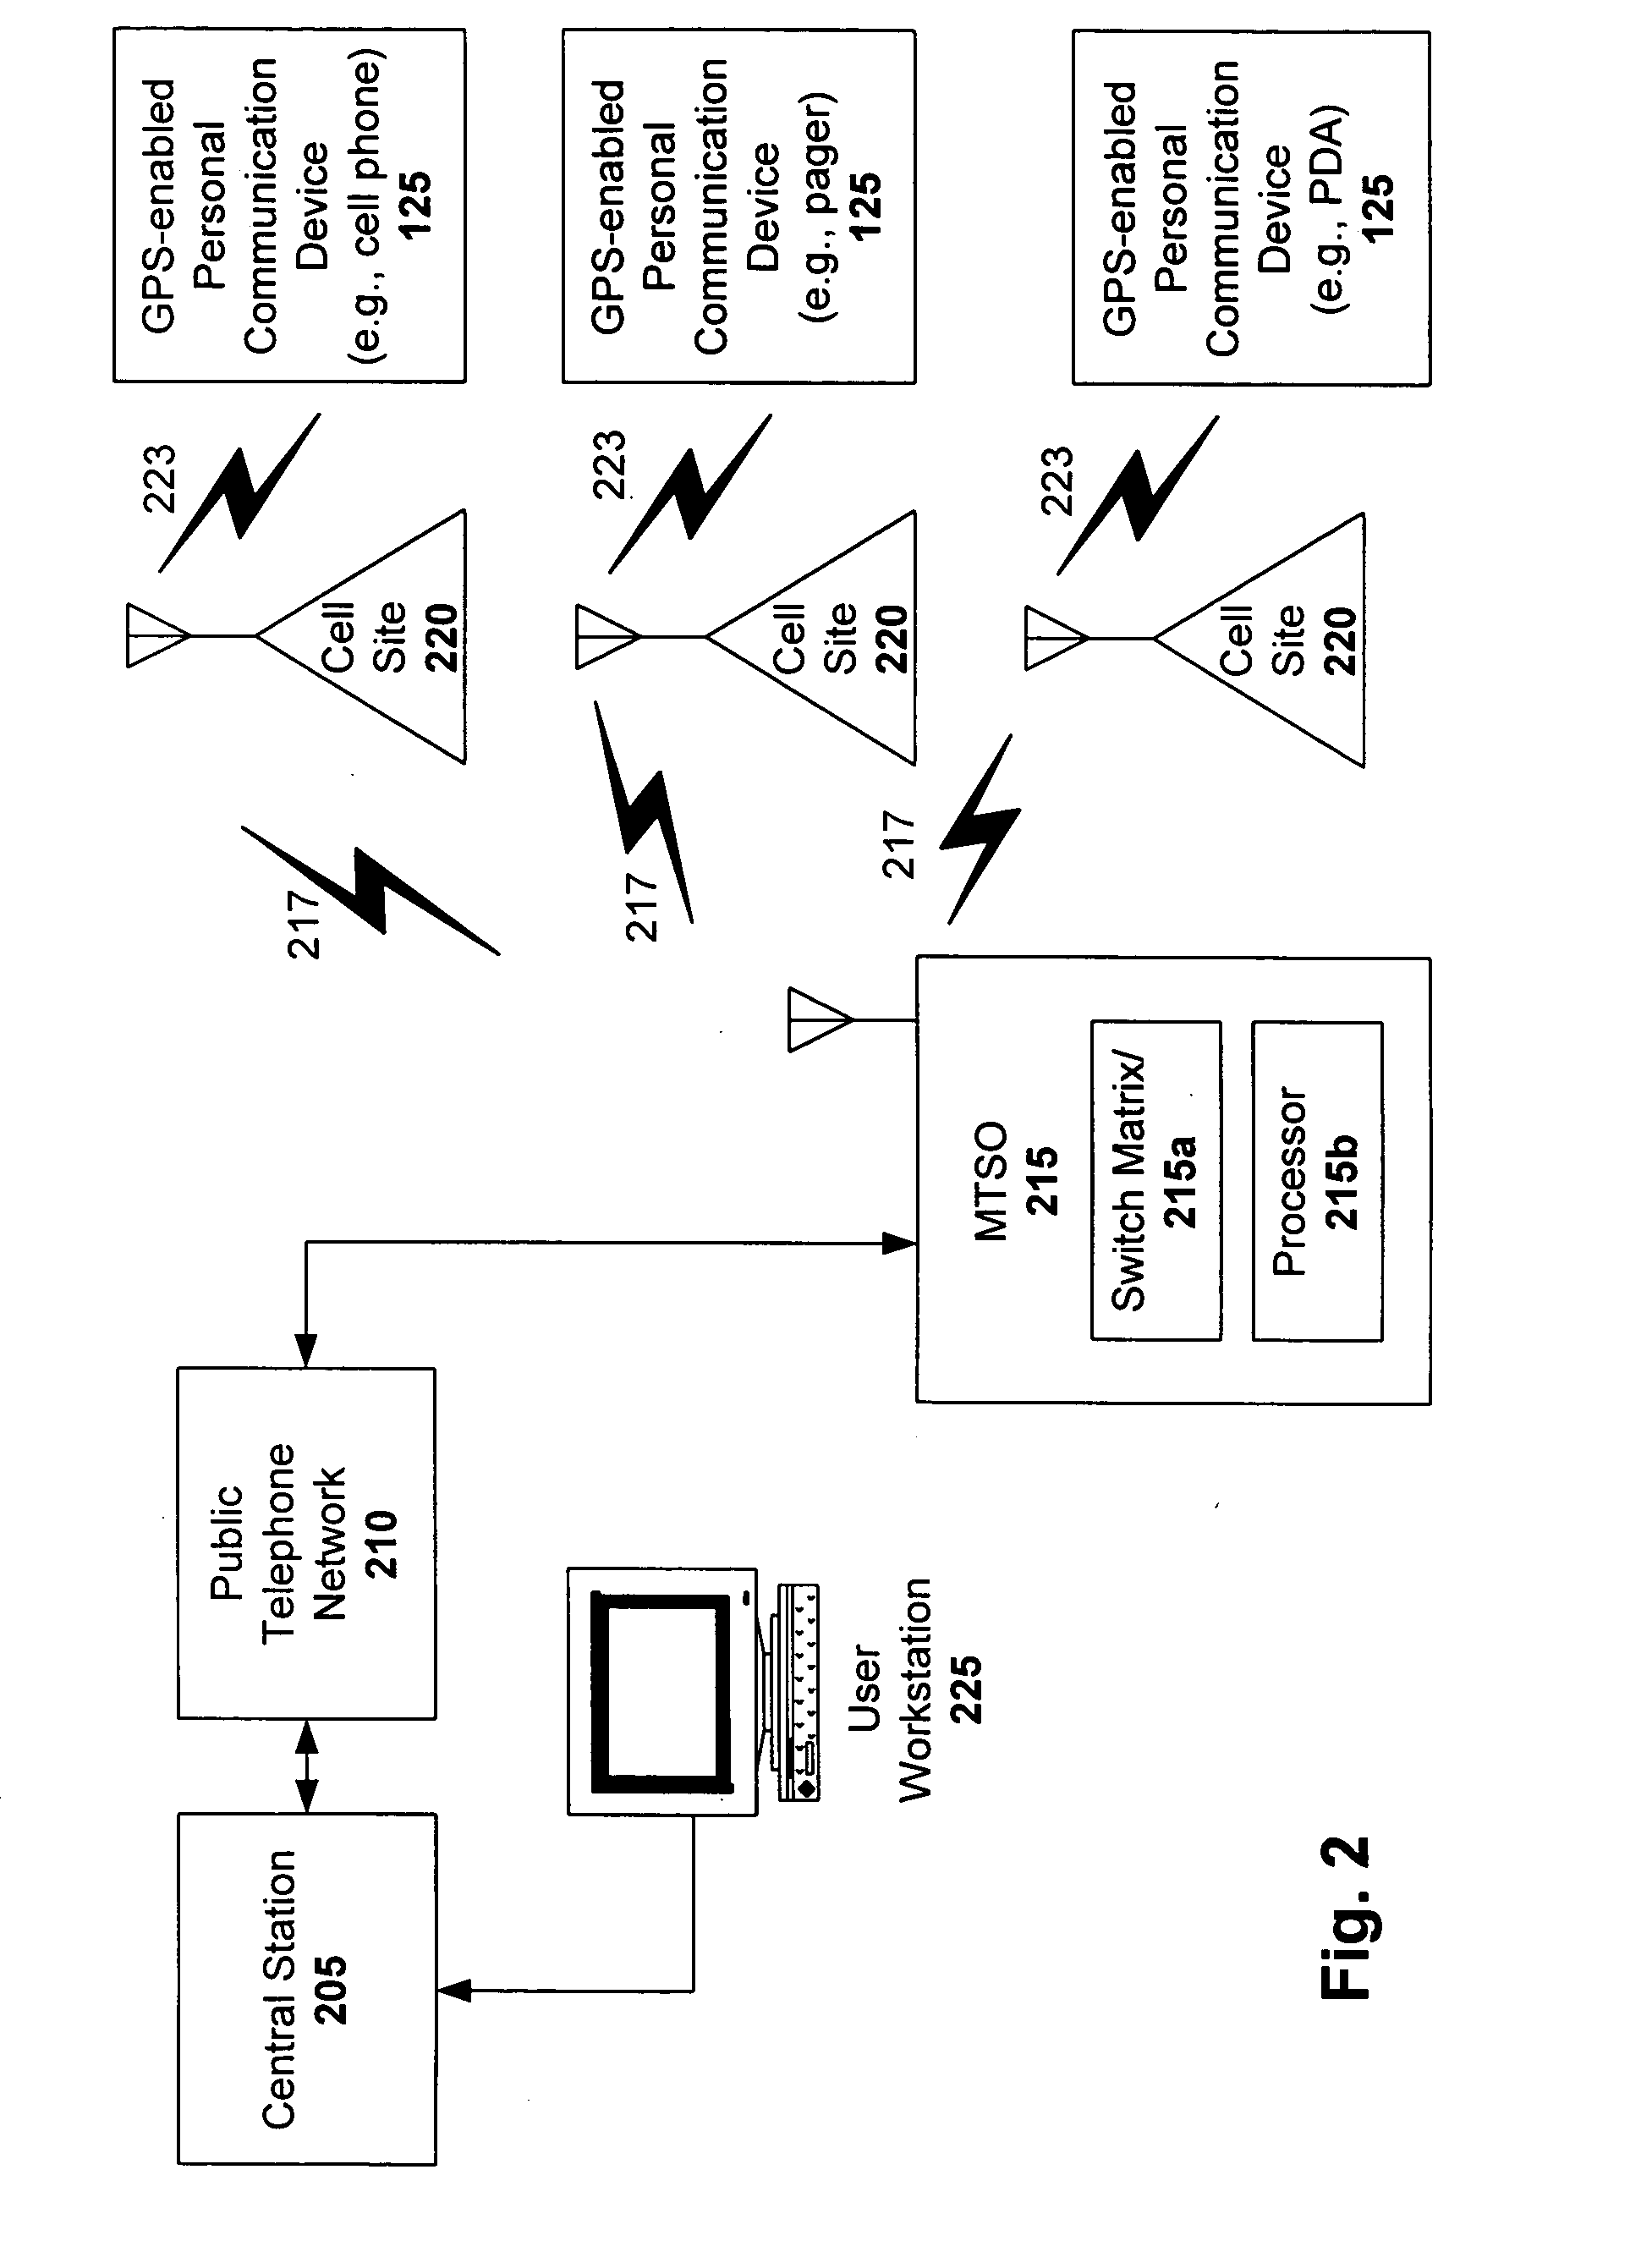 Radiation detection and tracking with GPS-enabled wireless communication system